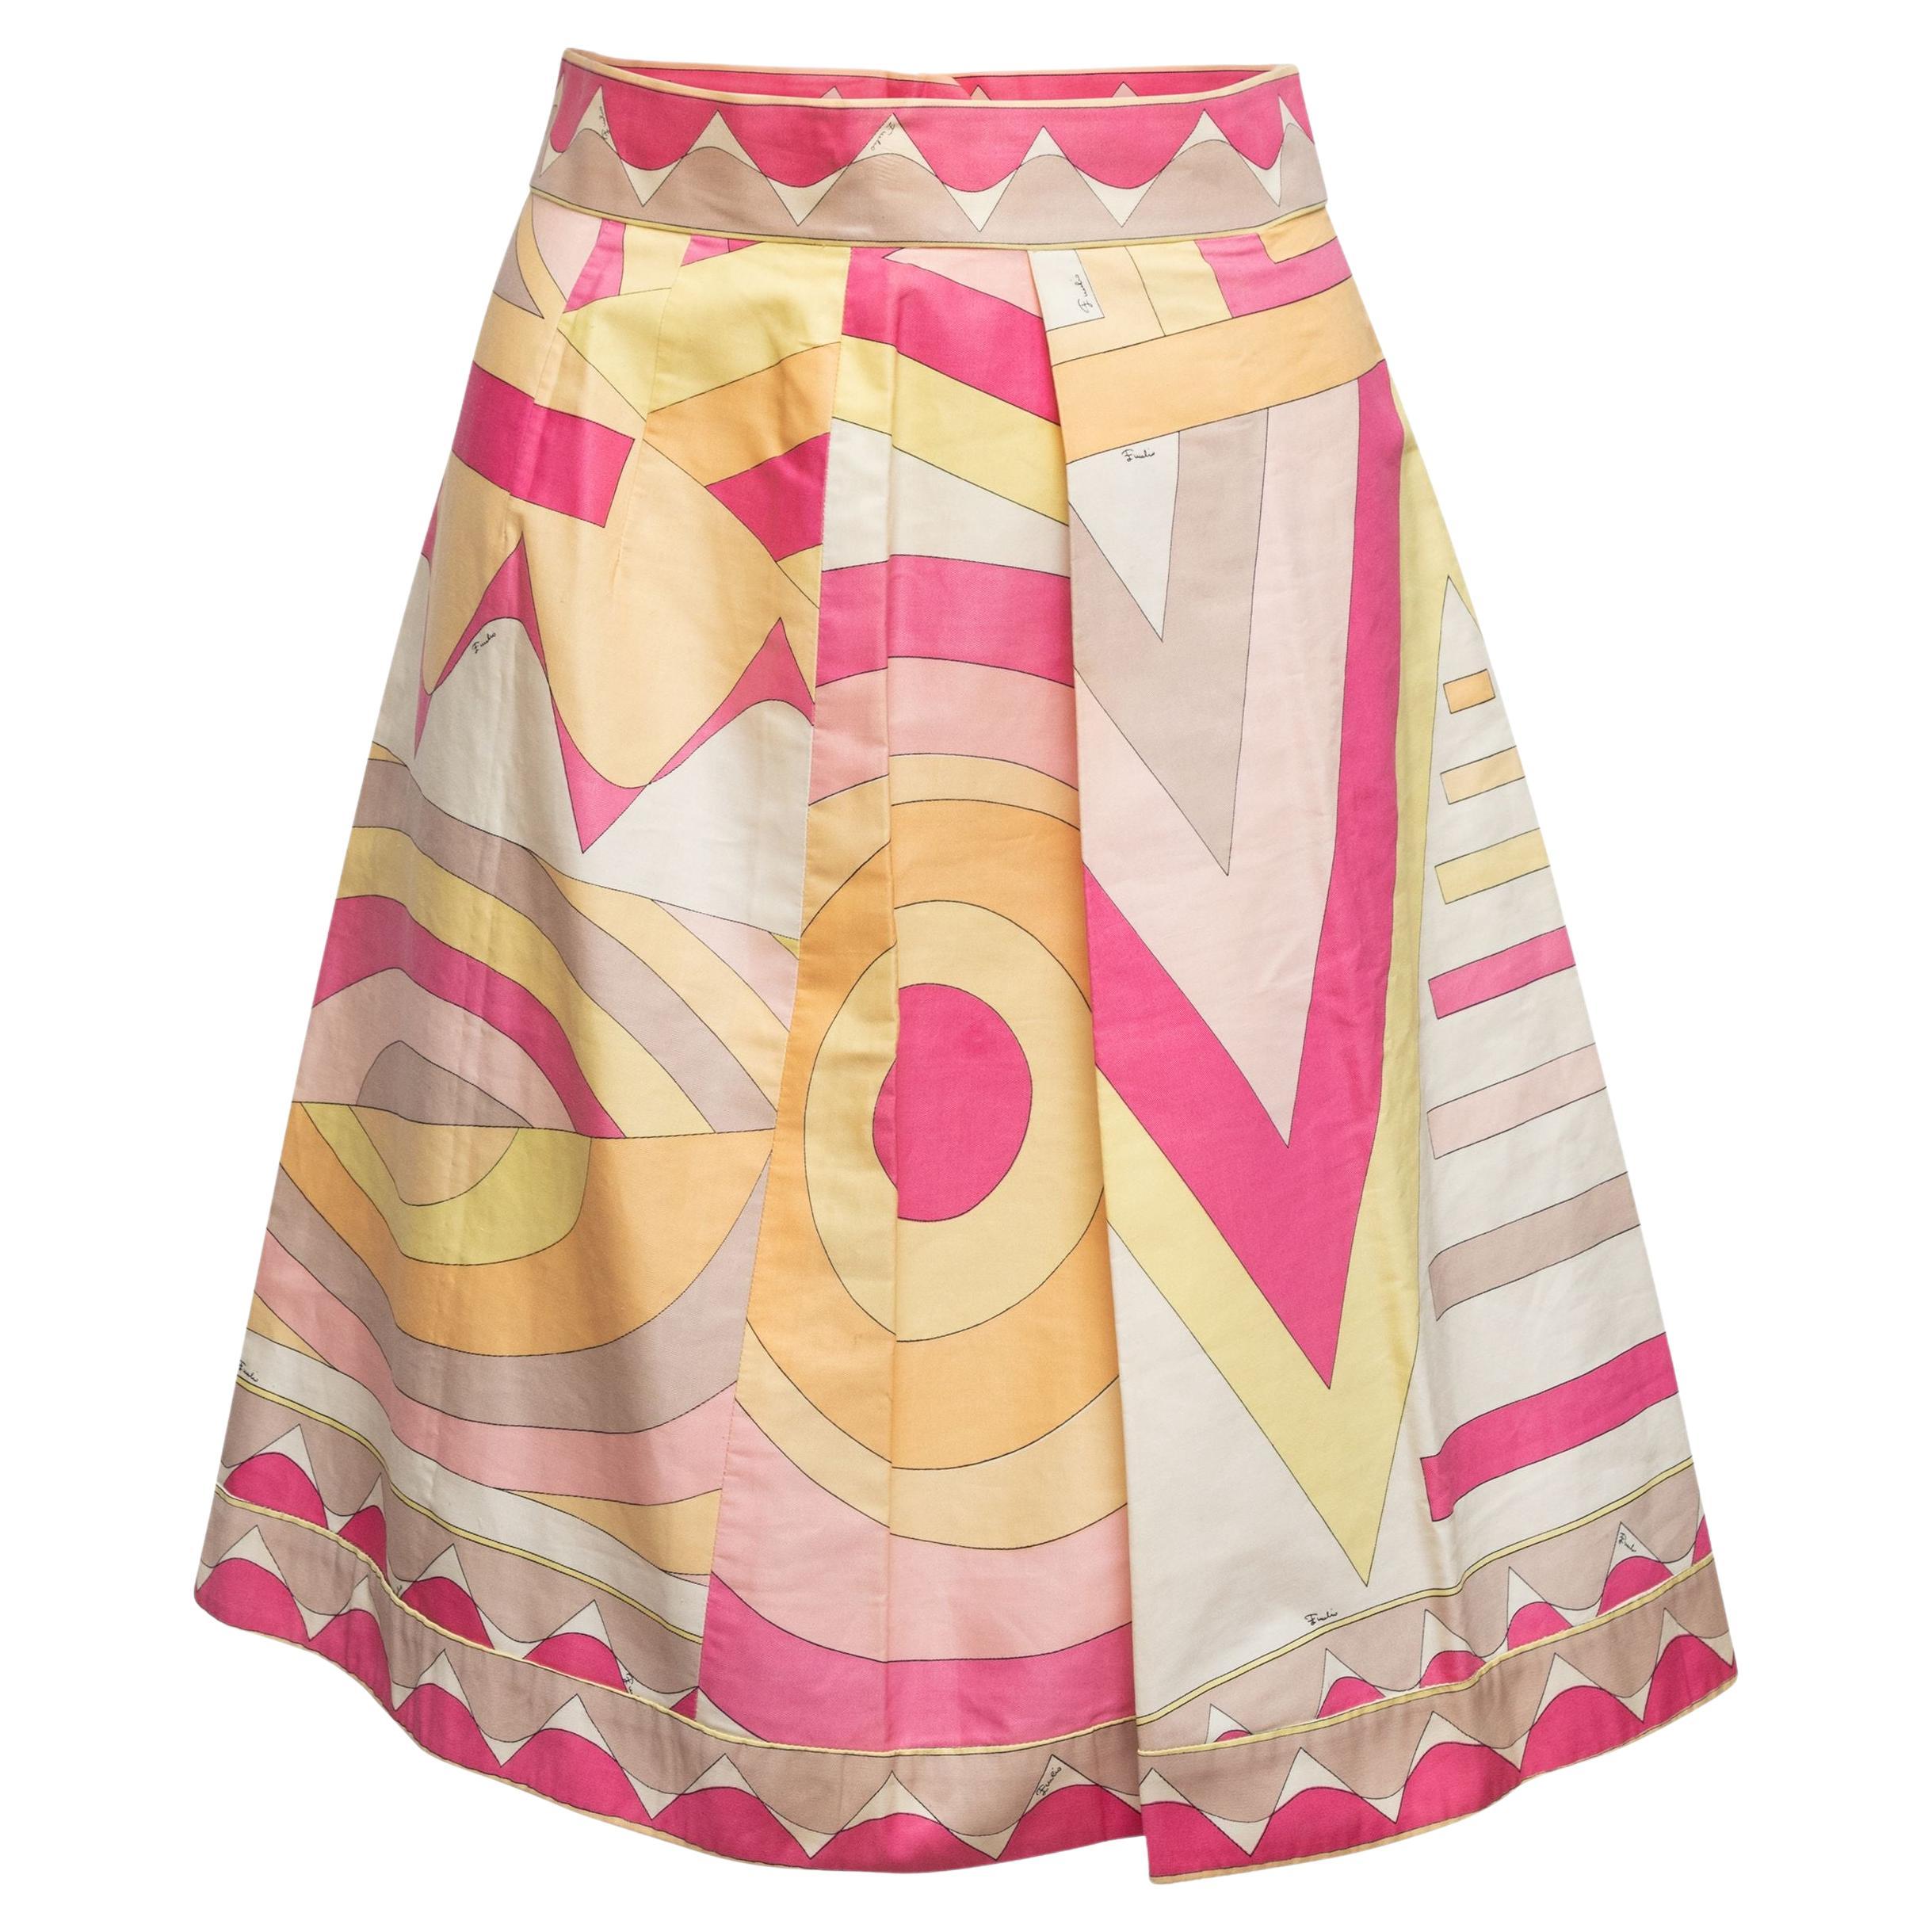 Emilio Pucci Pink and Red Pattern Midi Skirt - S